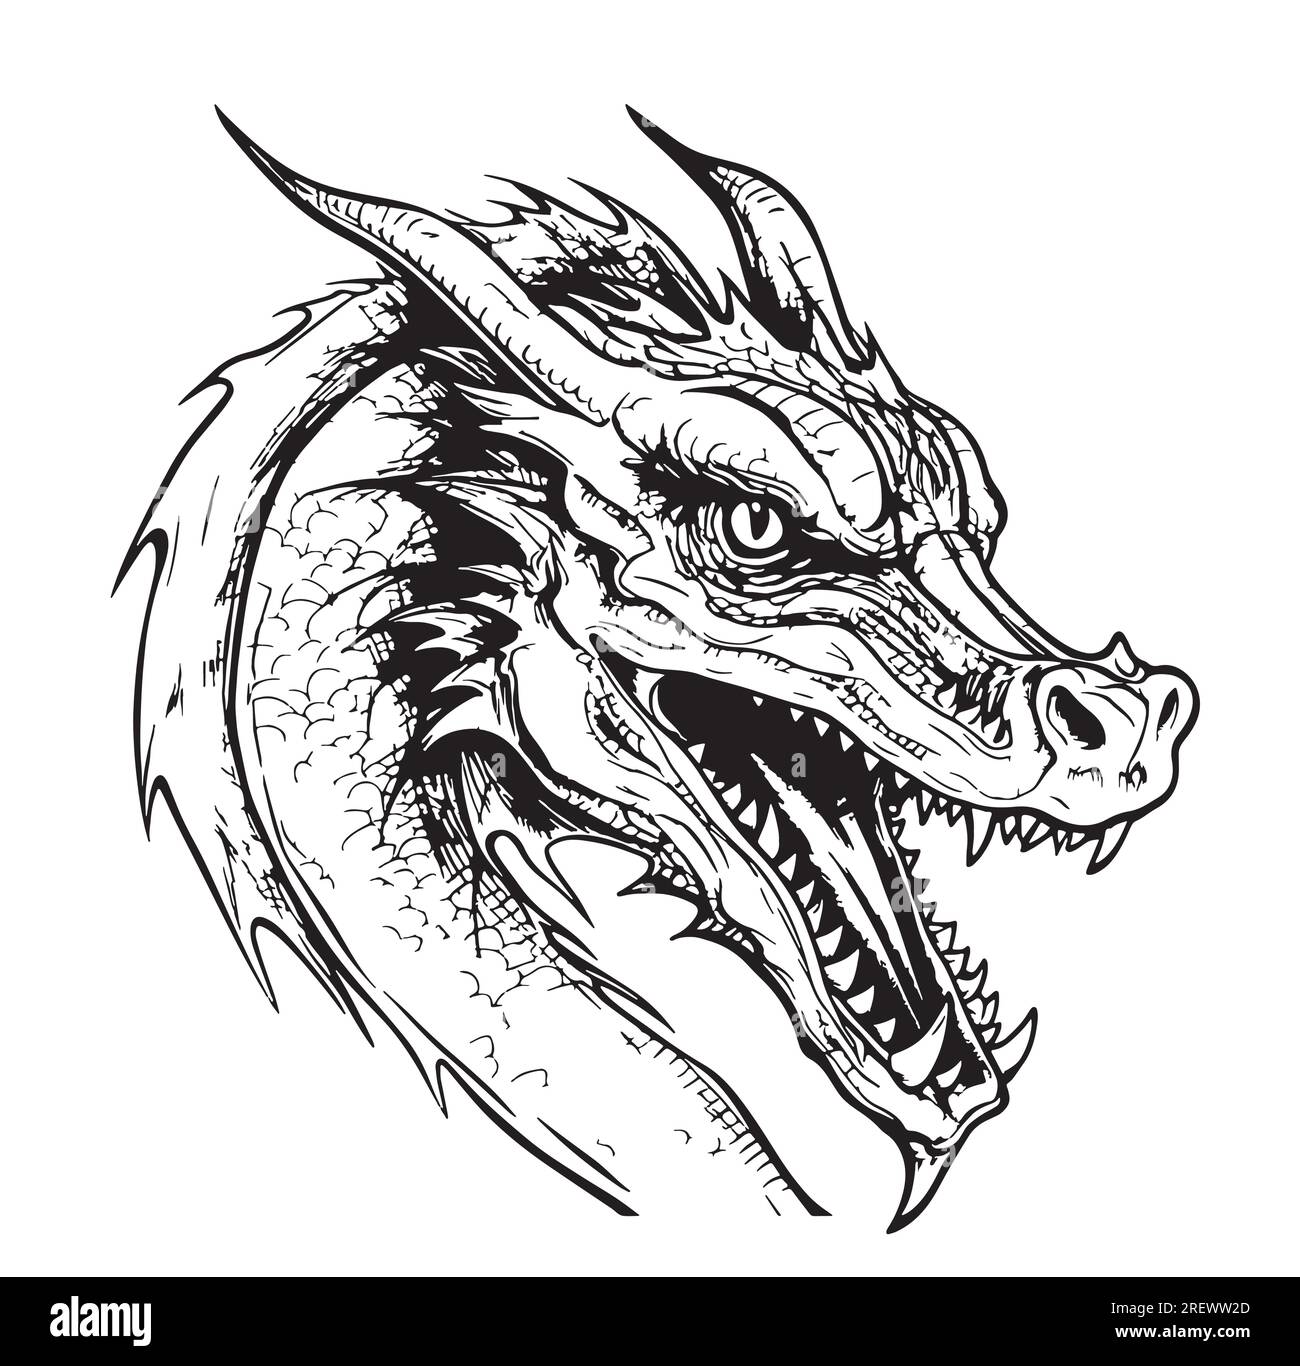 Dragon mystical sketch drawn in doodle style vector Stock Vector